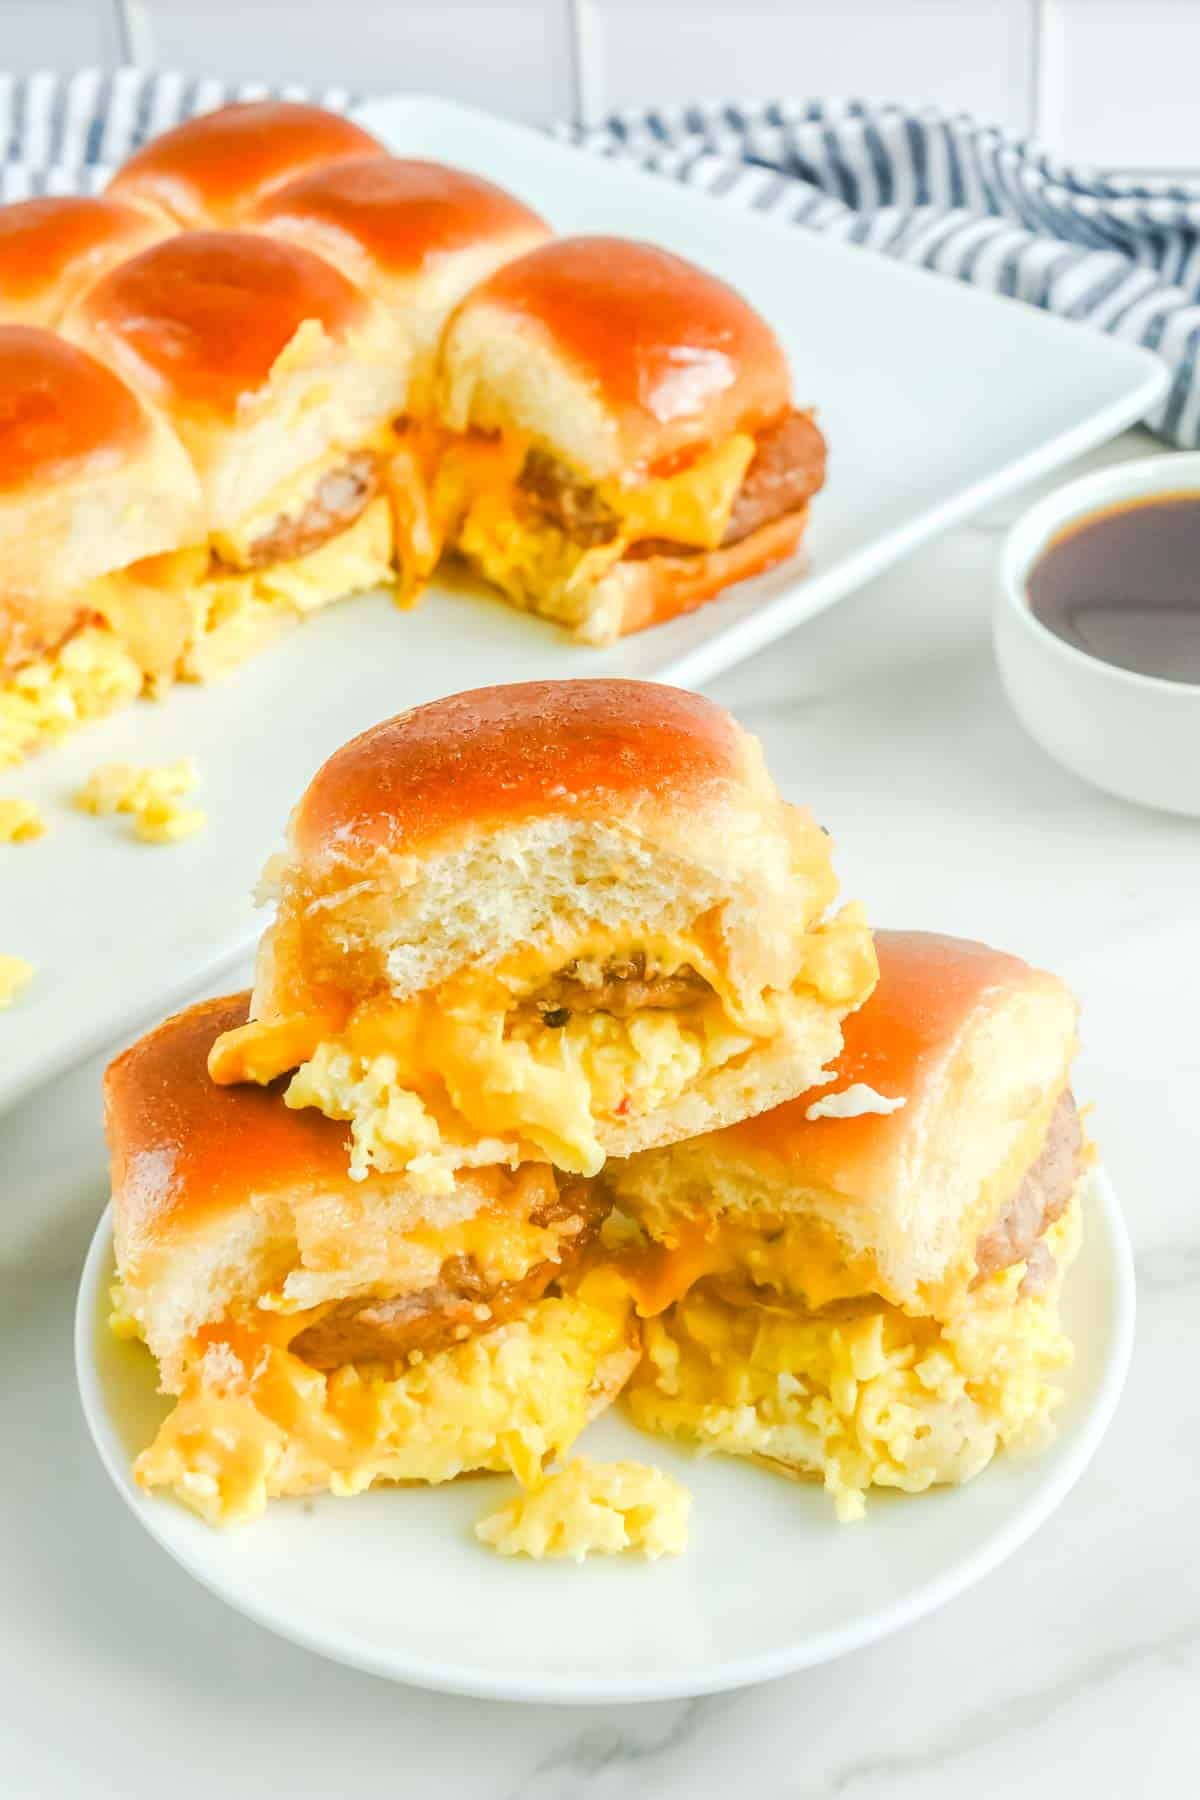 Hawaiian roll breakfast sliders on a plate and platter and a bowl of maple syrup.